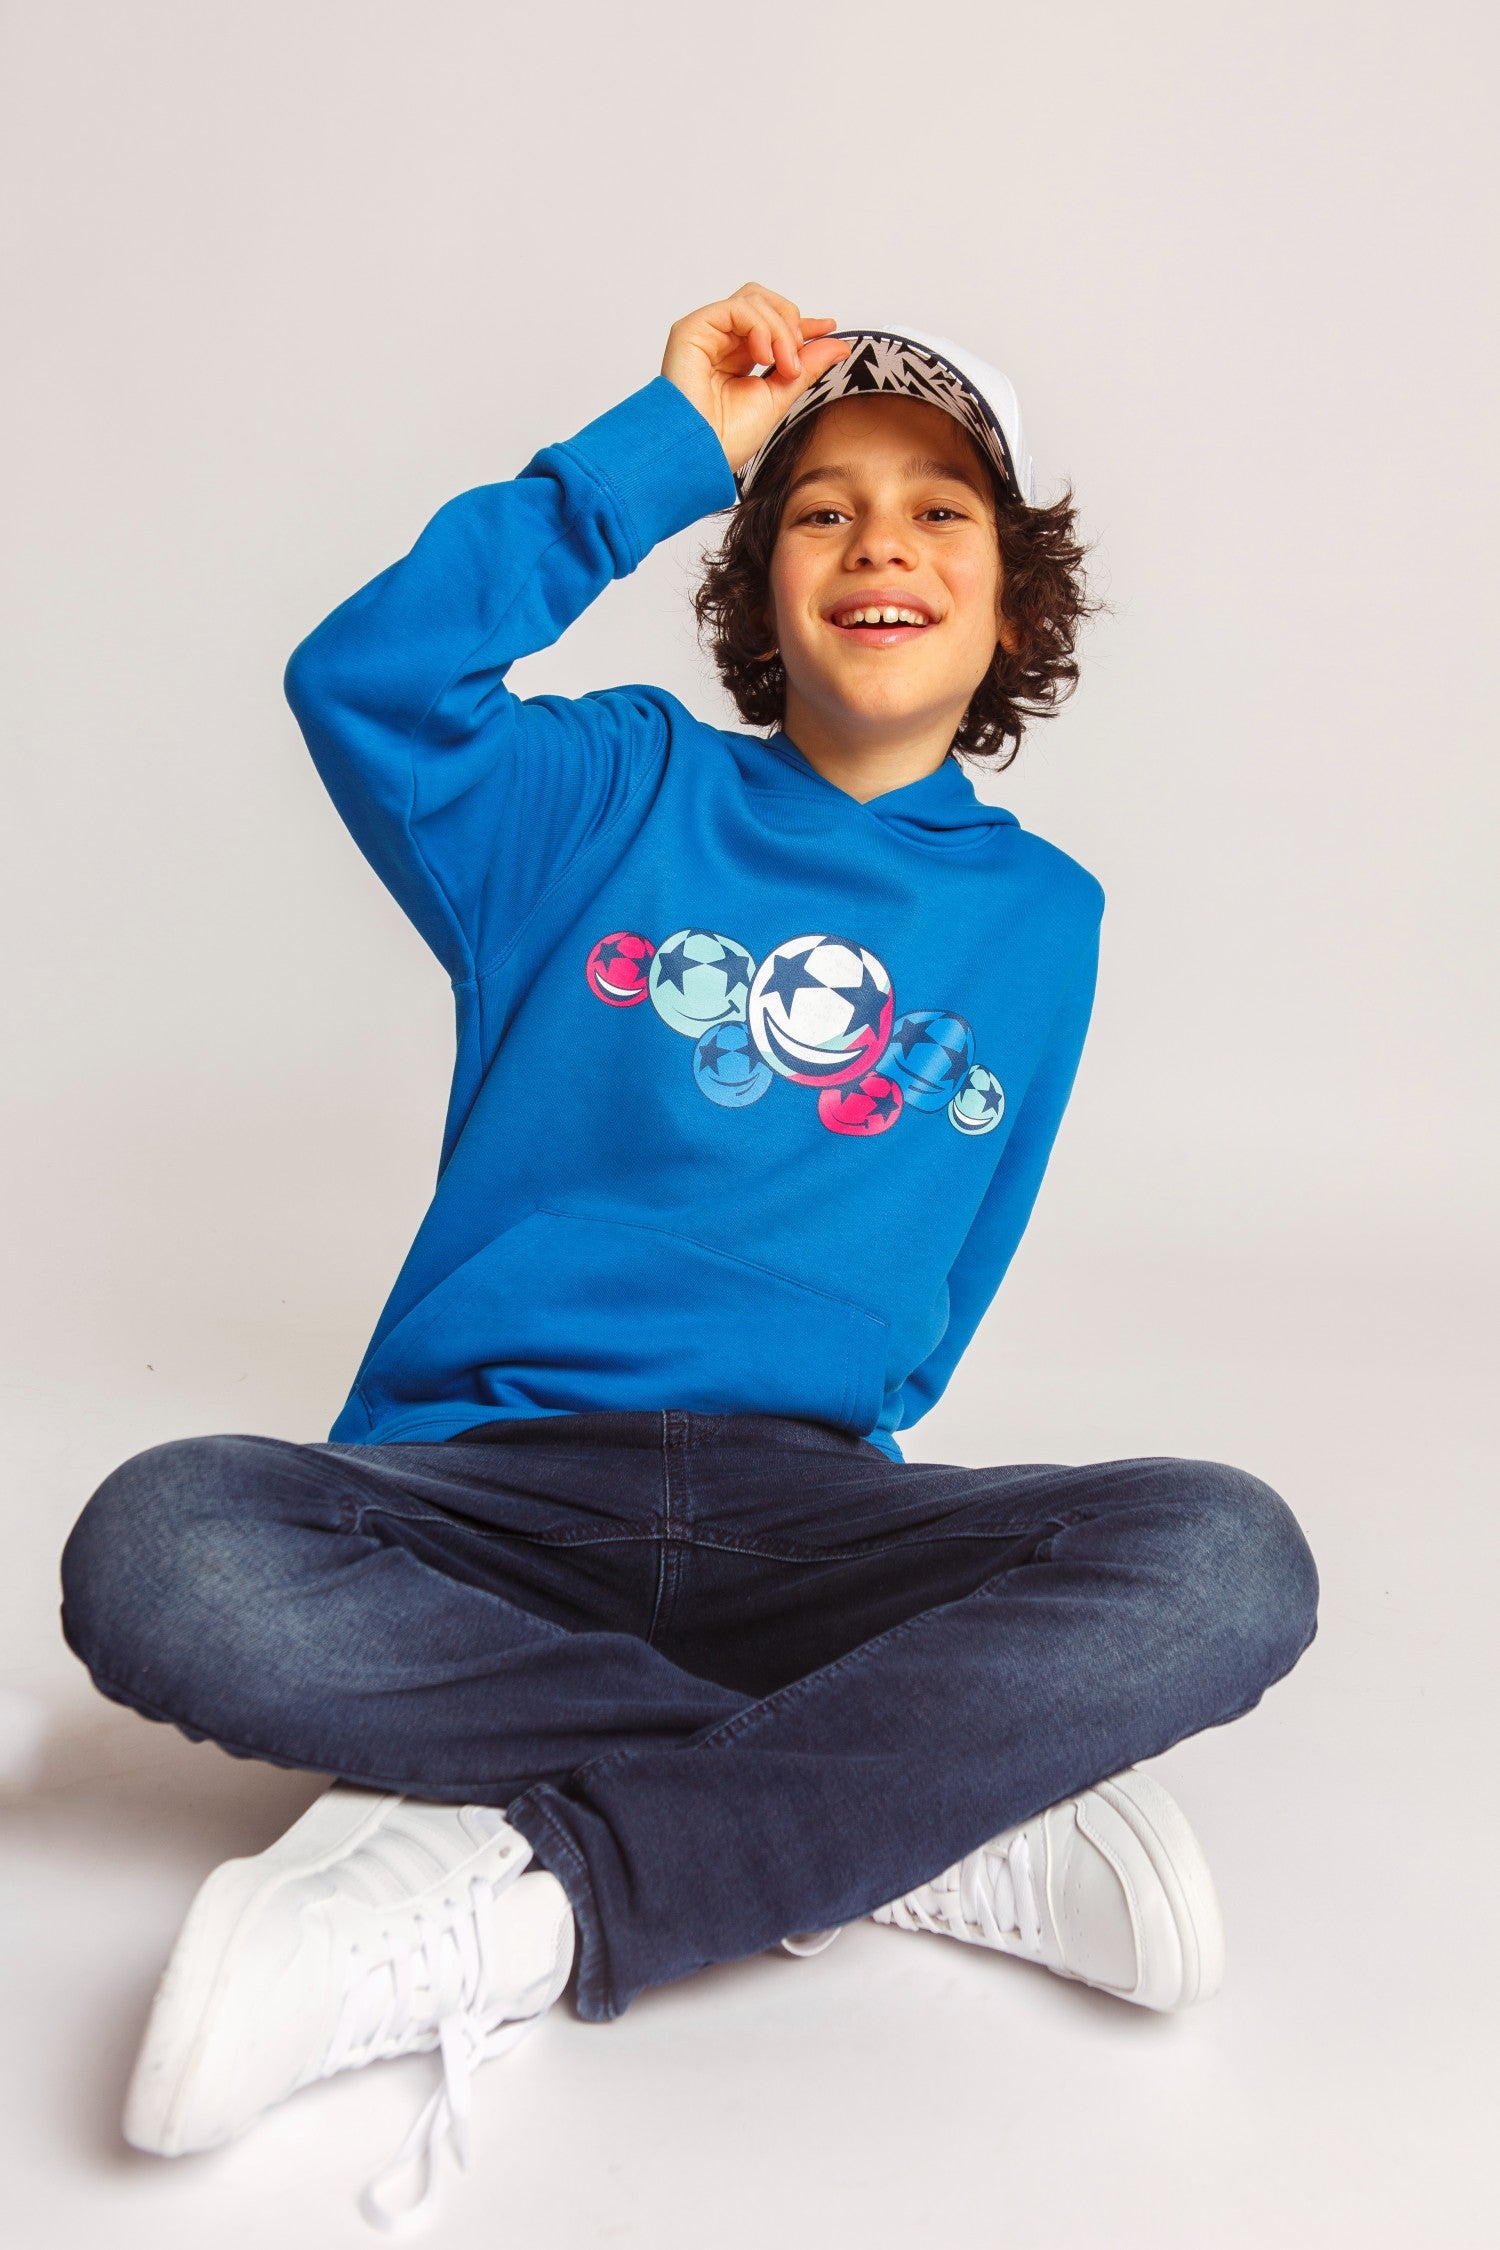 UCL Smiling Starball Kids Hoodie - Royal Blue UEFA Club Competitions Online Store